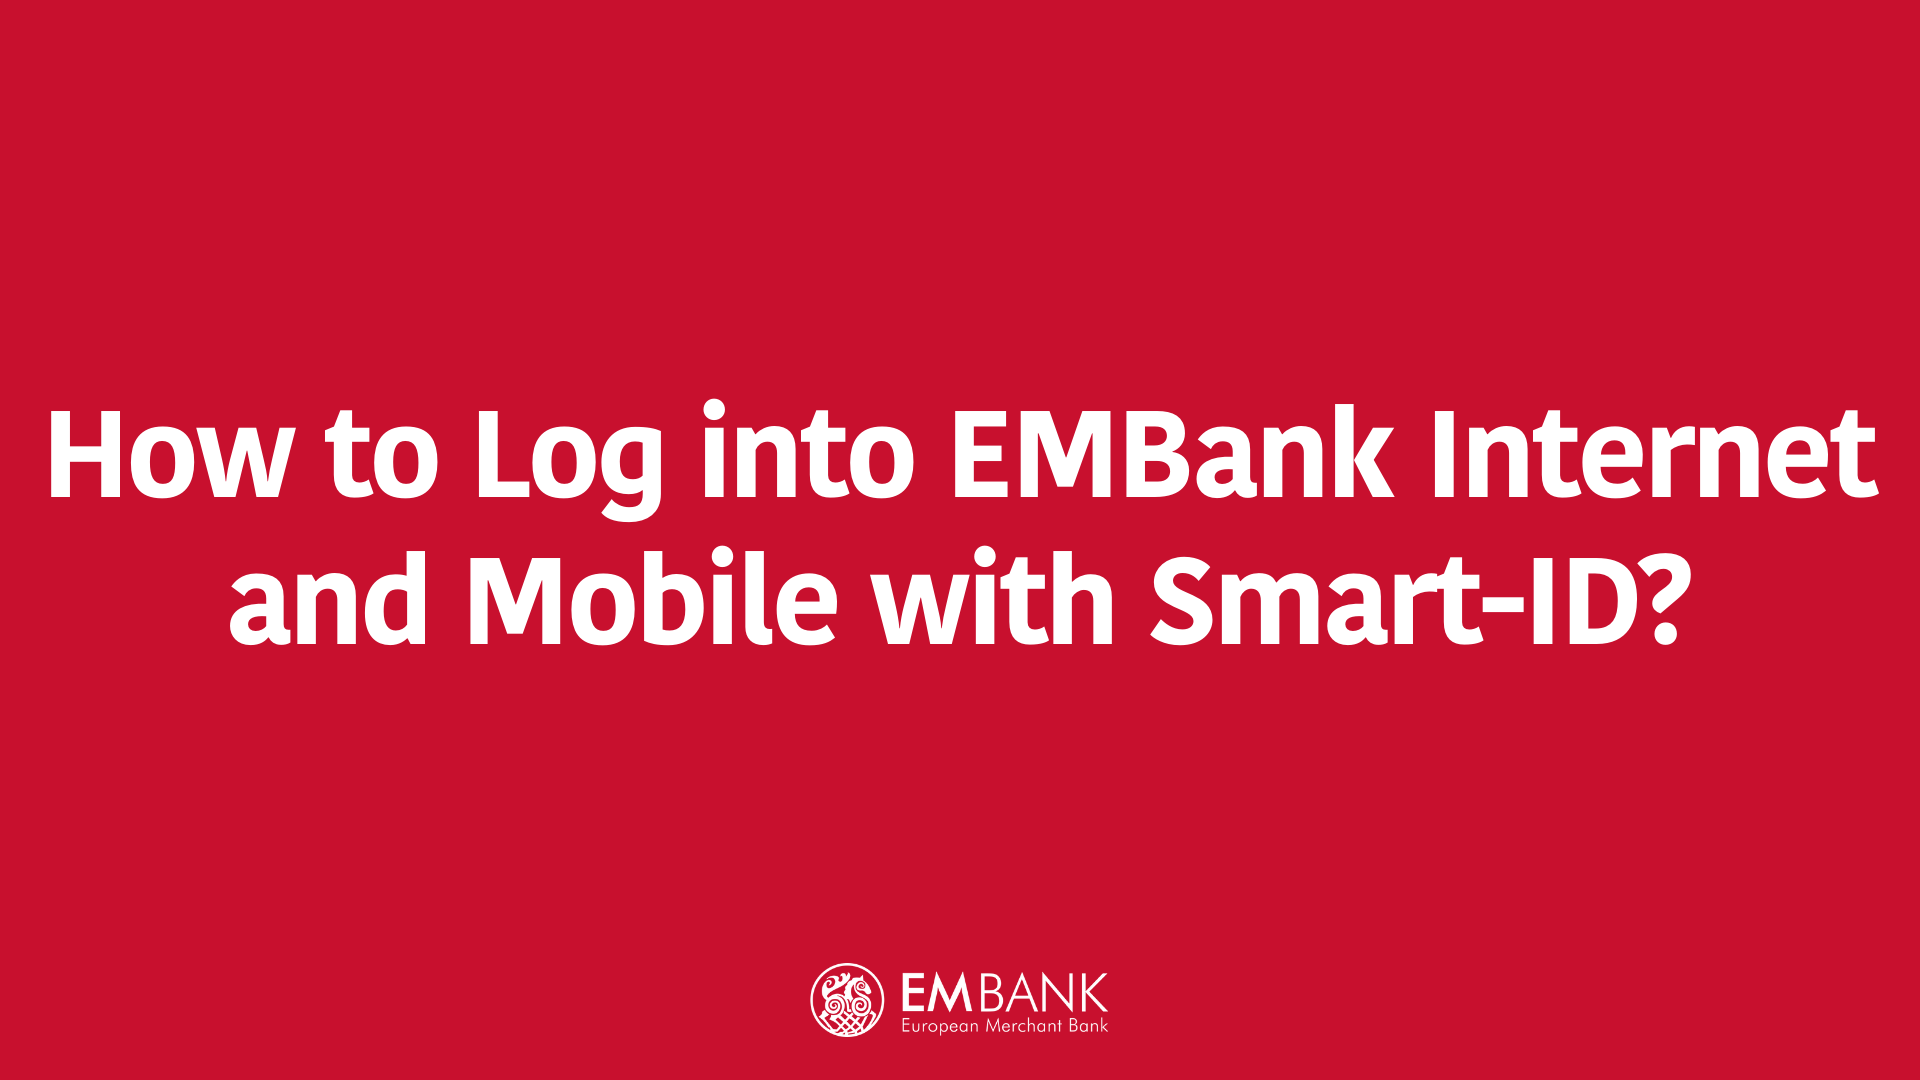 How to Log into EMBank Internet and Mobile with Smart-ID?